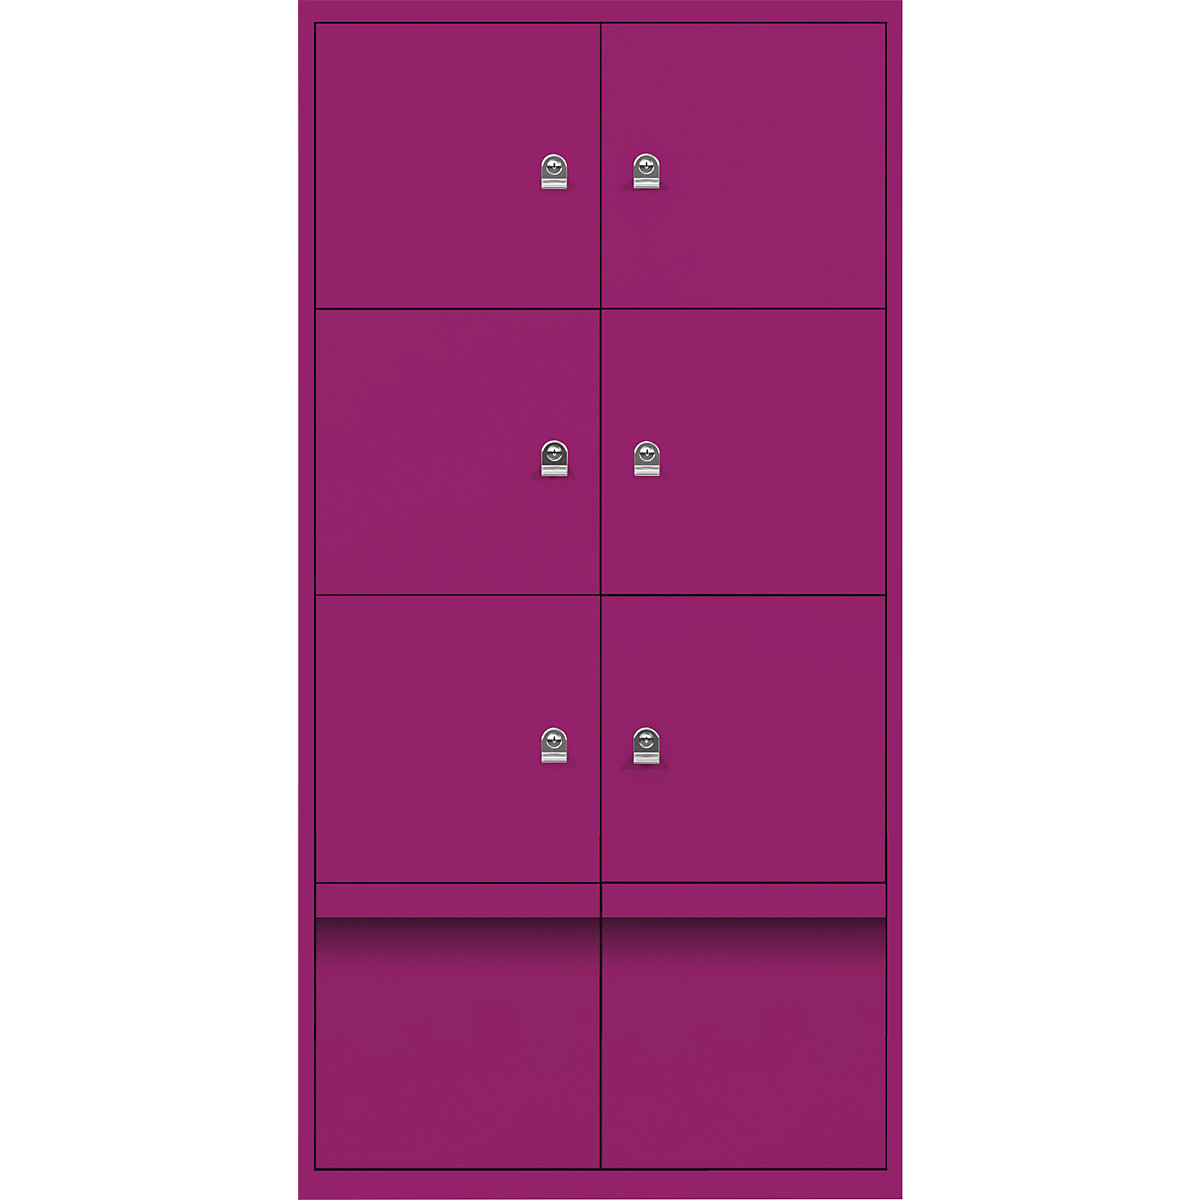 BISLEY – LateralFile™ lodge, with 6 lockable compartments and 2 drawers, height 375 mm each, fuchsia